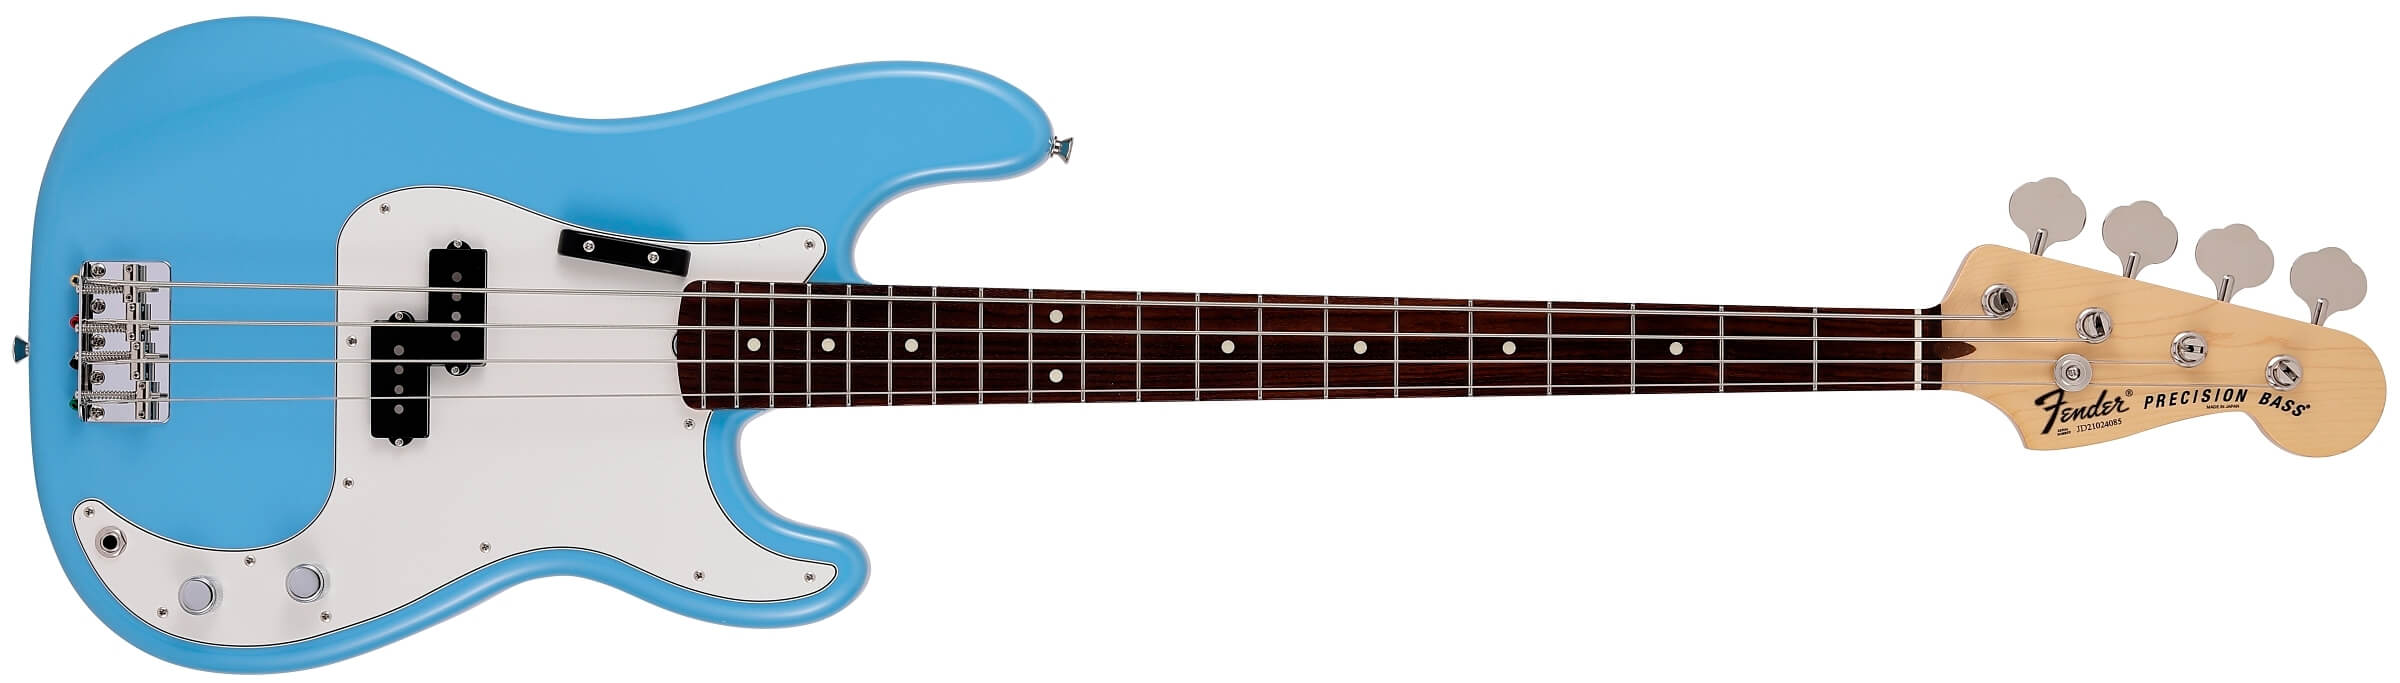 Made in Japan Limited International Color P Bass